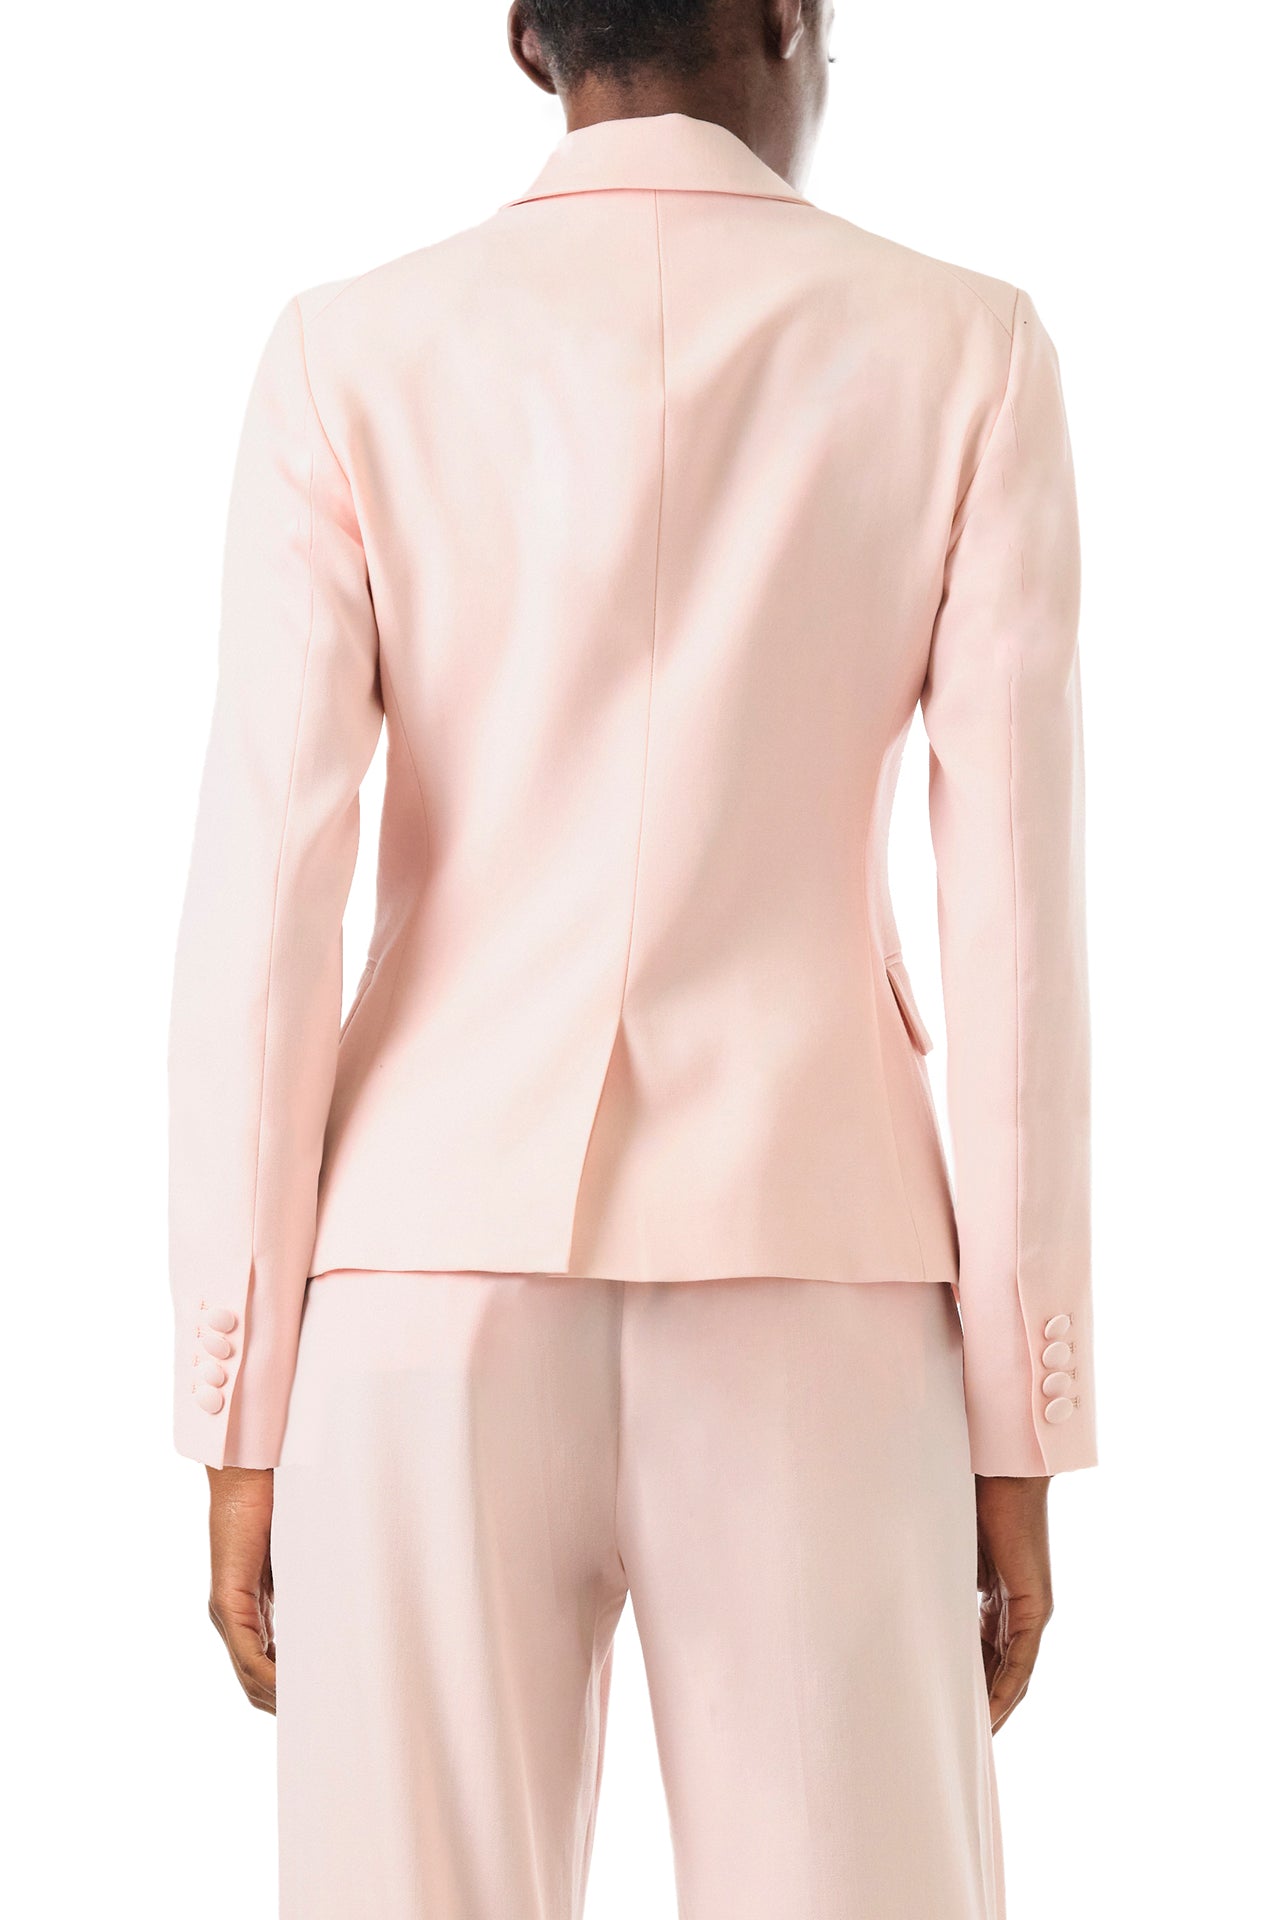 Monique Lhuillier Fall 2024 pale blush wool, double breasted wool blazer with full length sleeve - back.